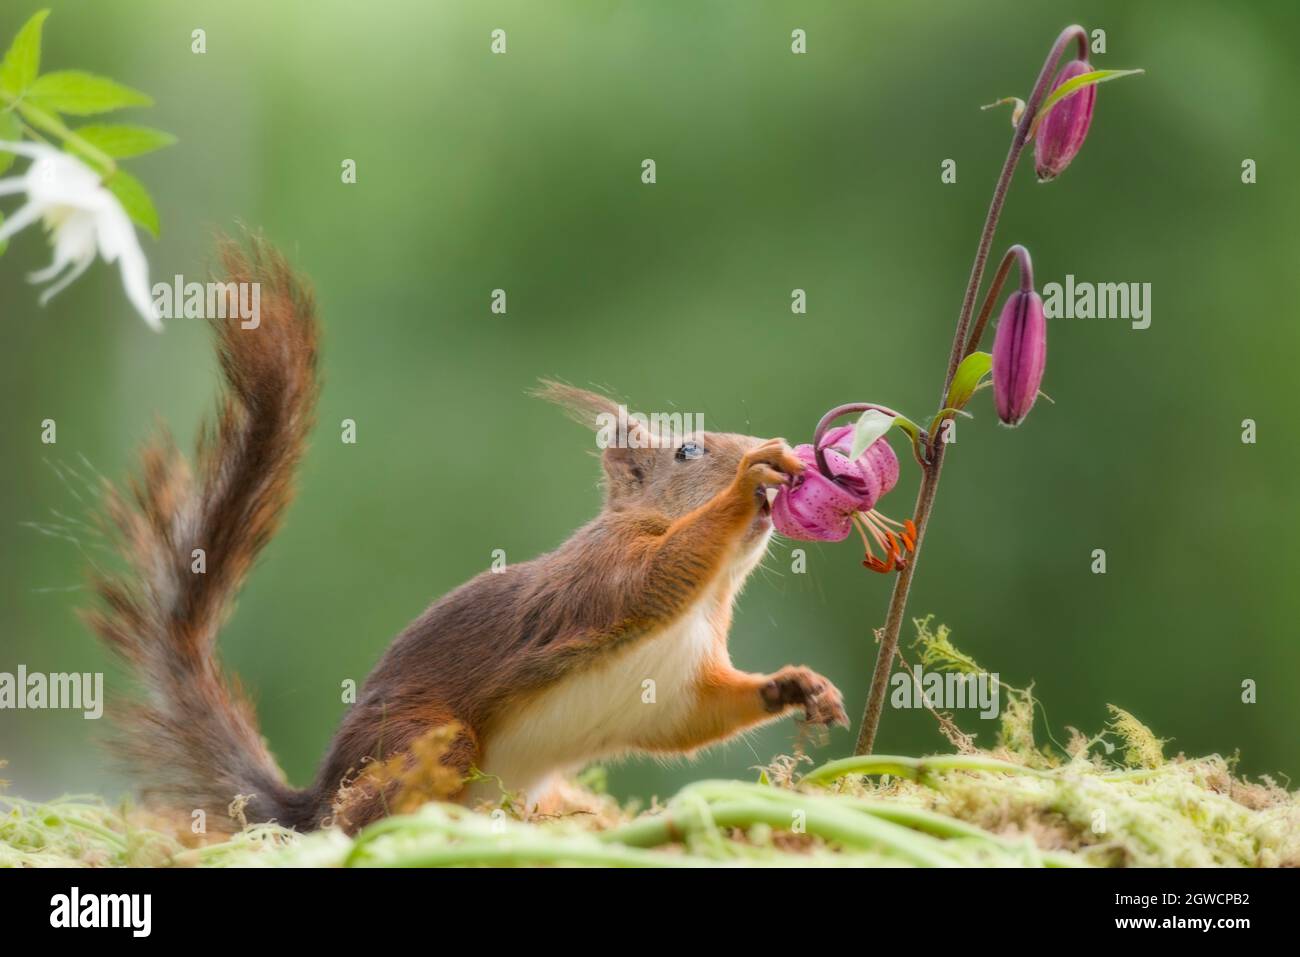 red squirrel touching a lily Stock Photo